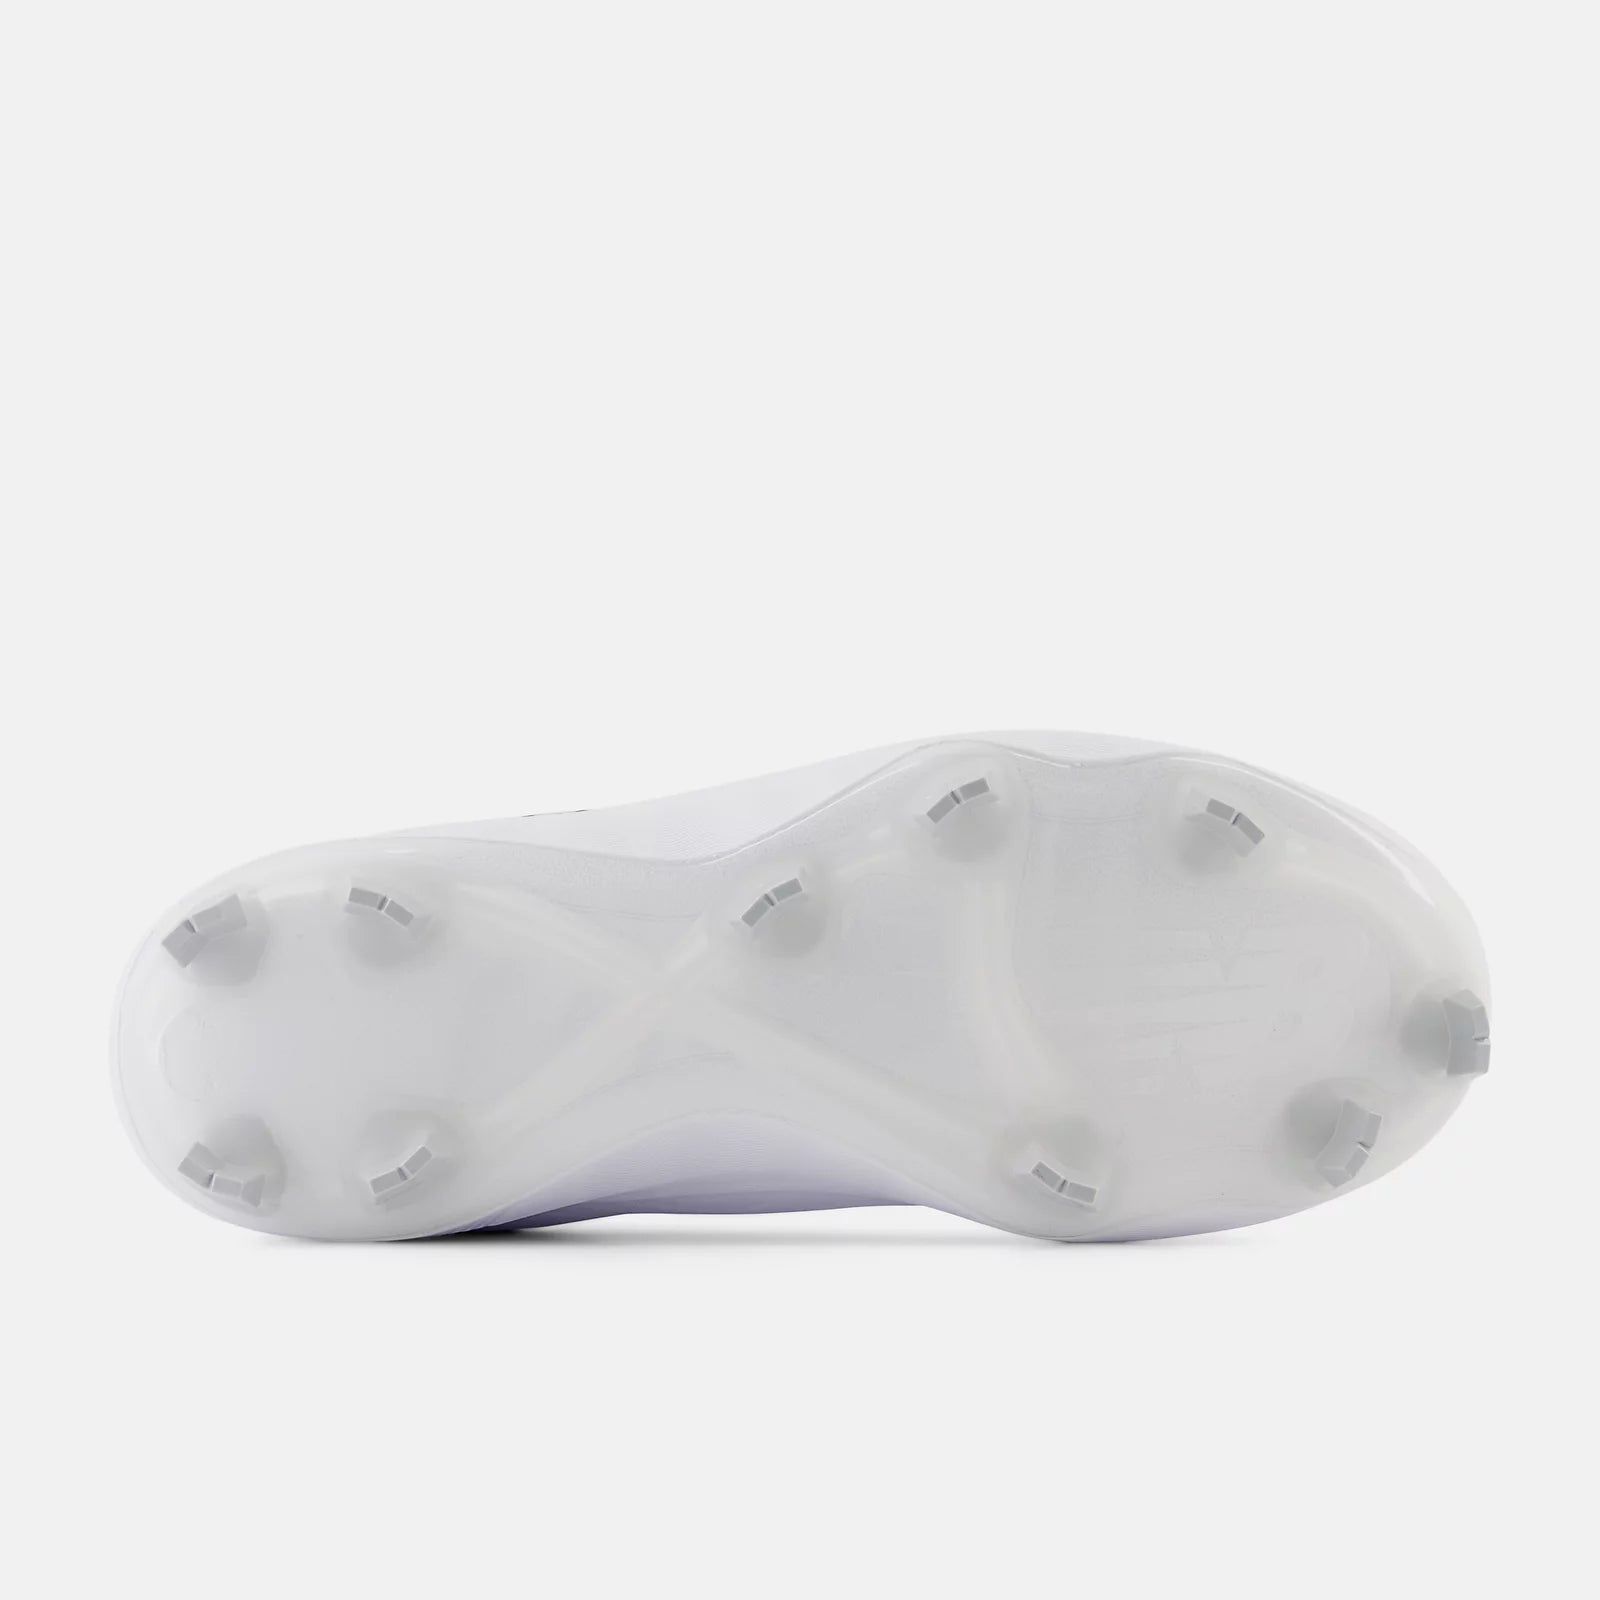 New Balance SPFUSEW4 Women's Molded Cleats: White